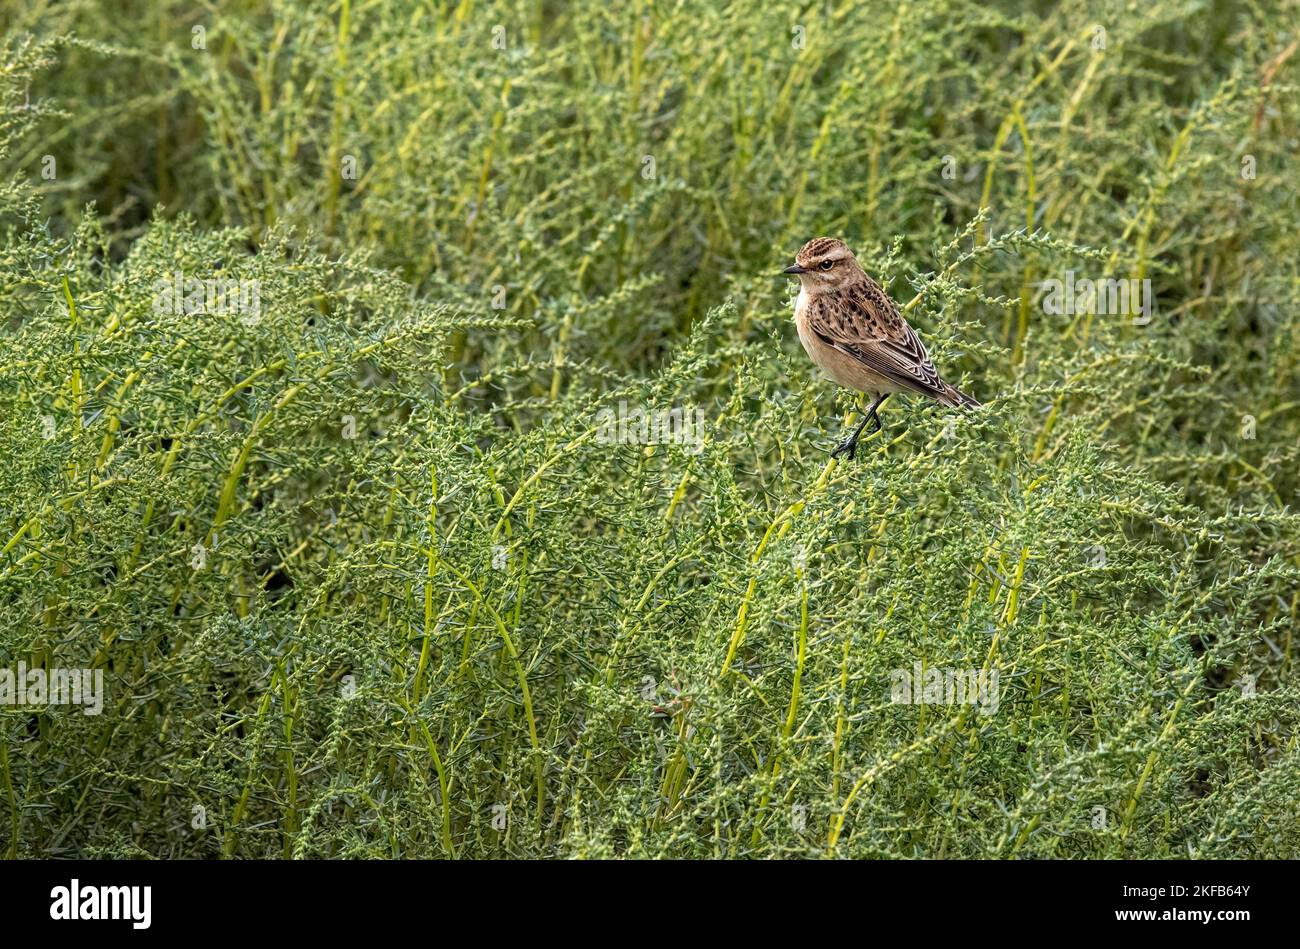 Whinchat taken at Connahs Quay nature reserve on the Dee Estuary, North Wales, Great Britain, UK Stock Photo